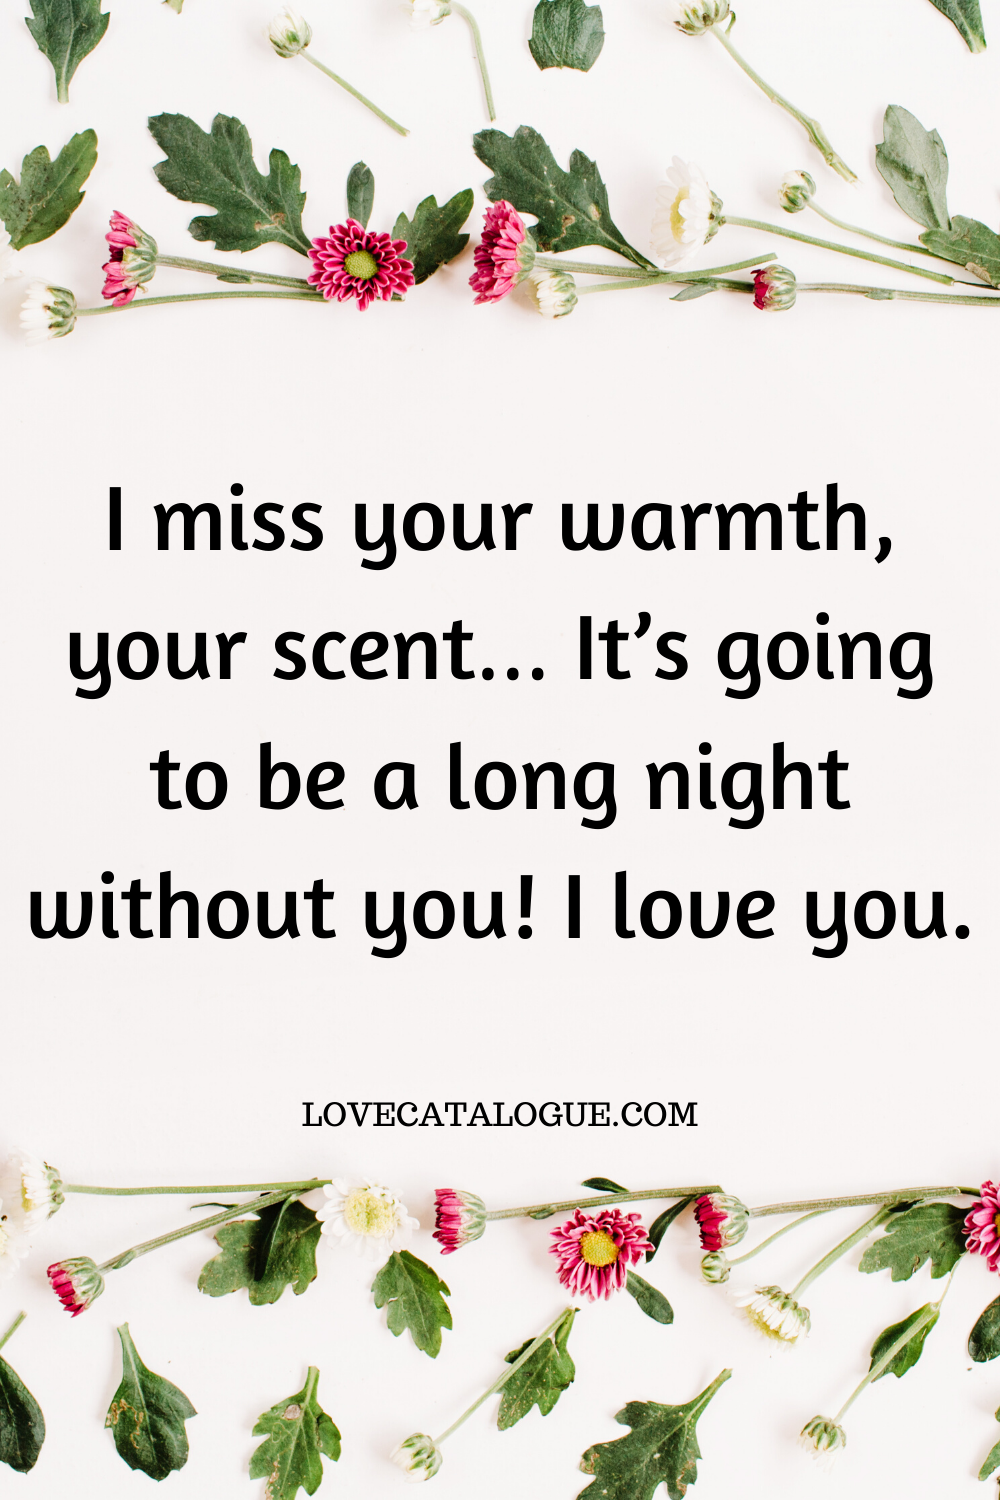 good night message for her long distance